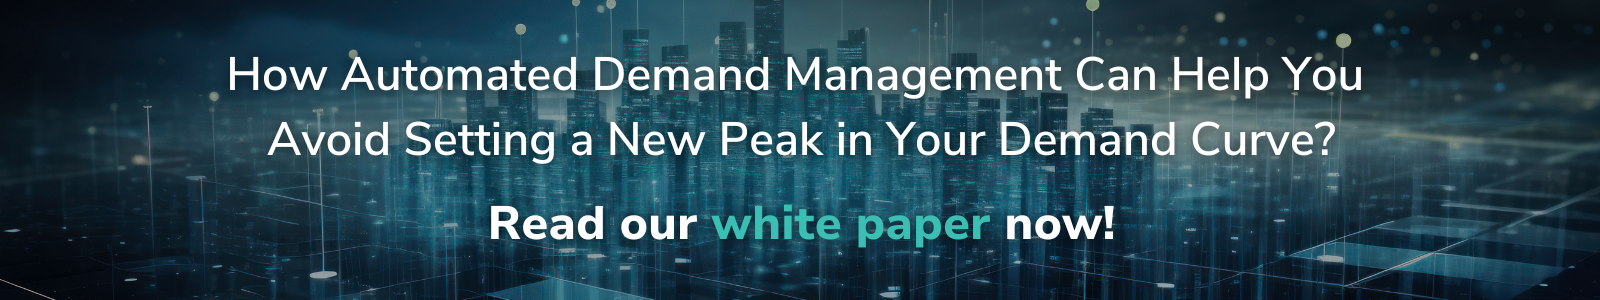 How Automated Demand Management Can Help You Avoid Setting a New Peak in Your Demand Curve Read our white paper now!